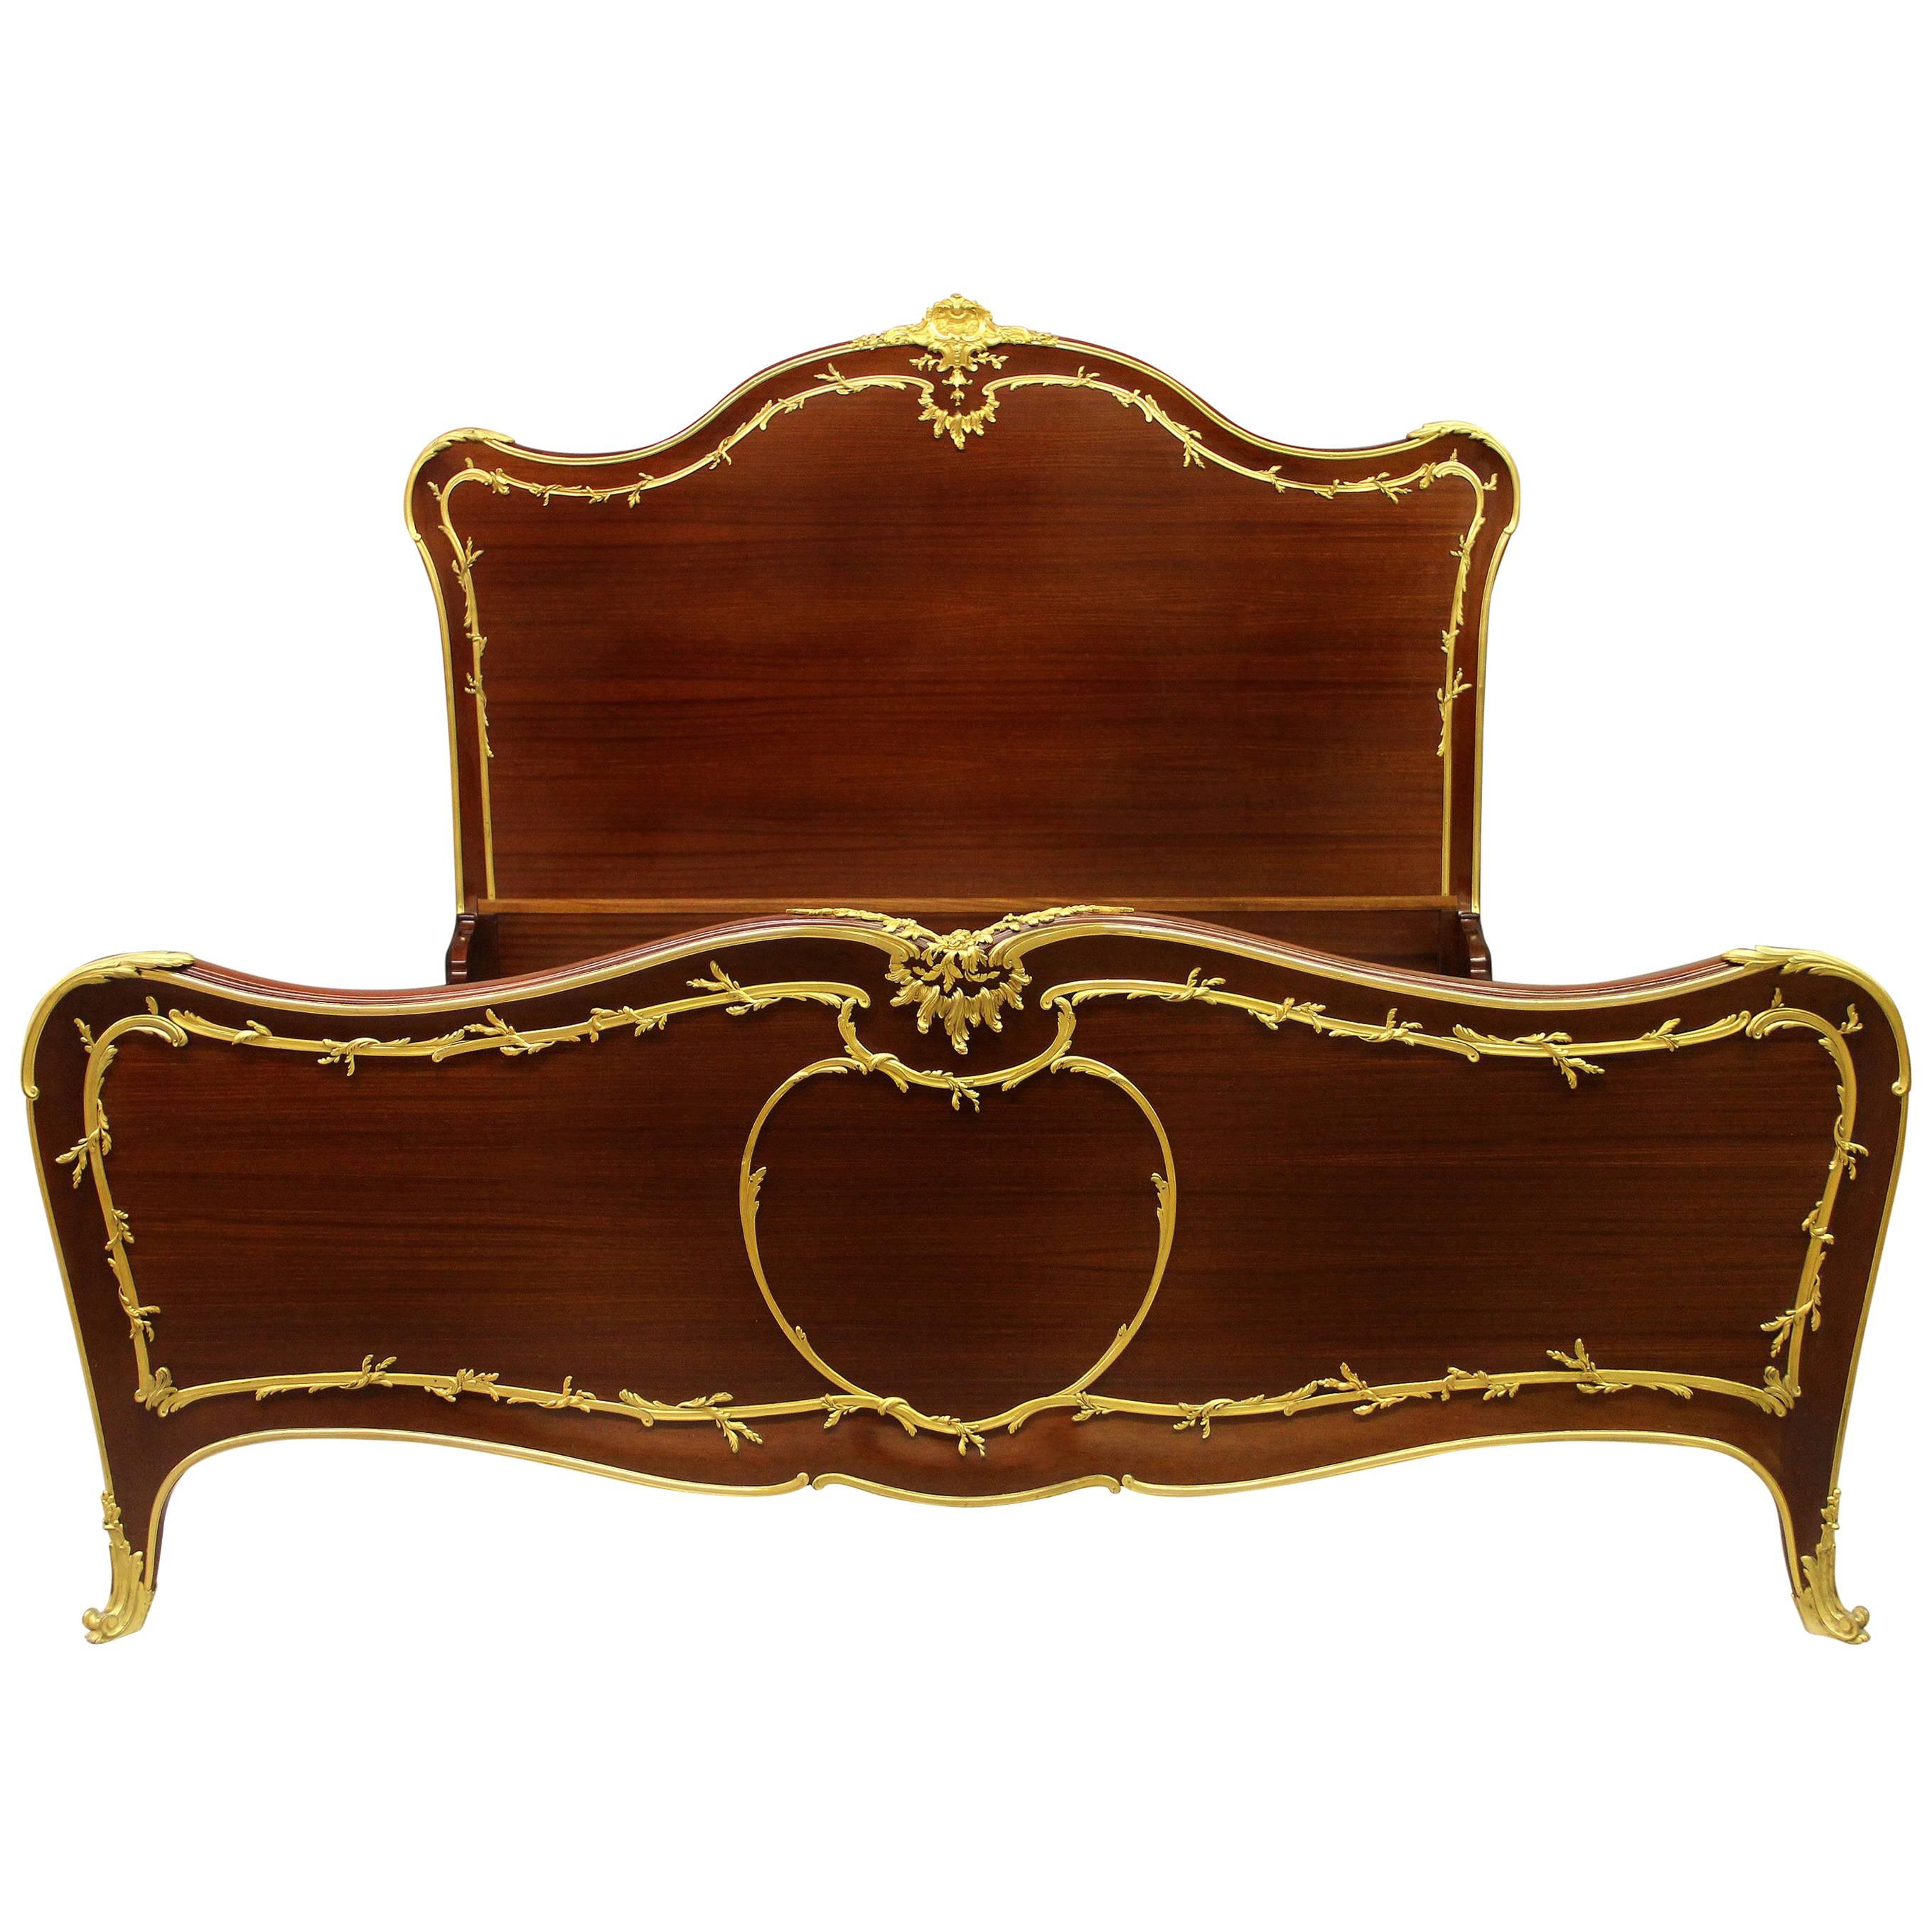 Early 20th Century Gilt Bronze-Mounted Mahogany King Size Bed by François Linke